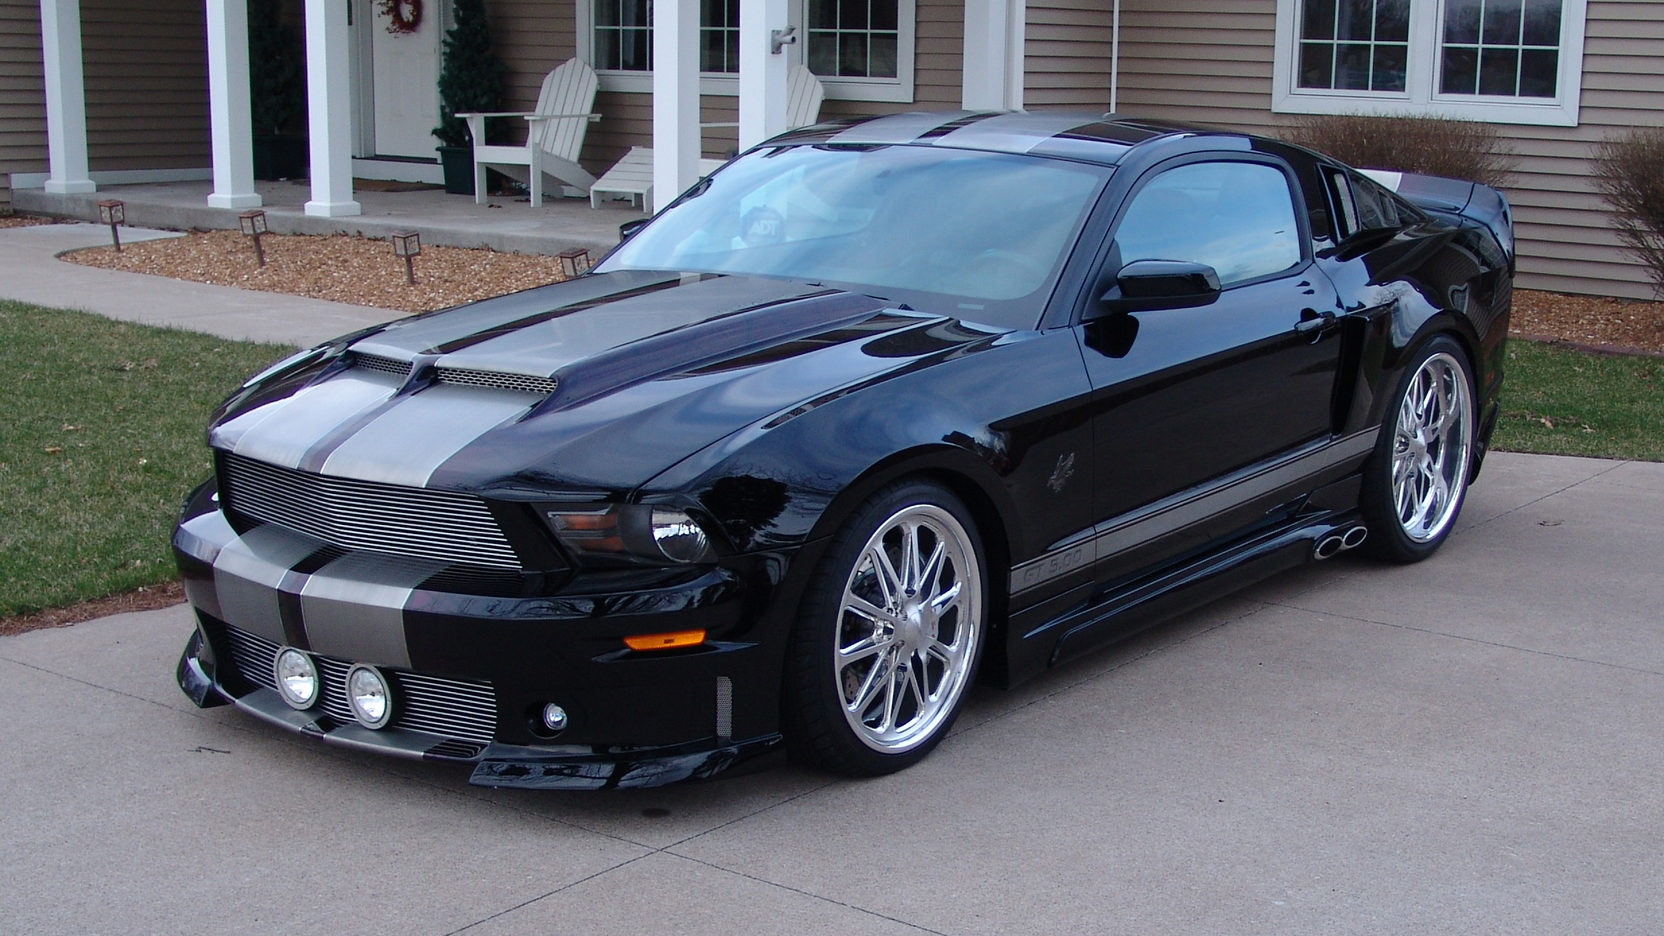 2011 Ford Mustang GT Pegasus | S138 | St. Charles 2011